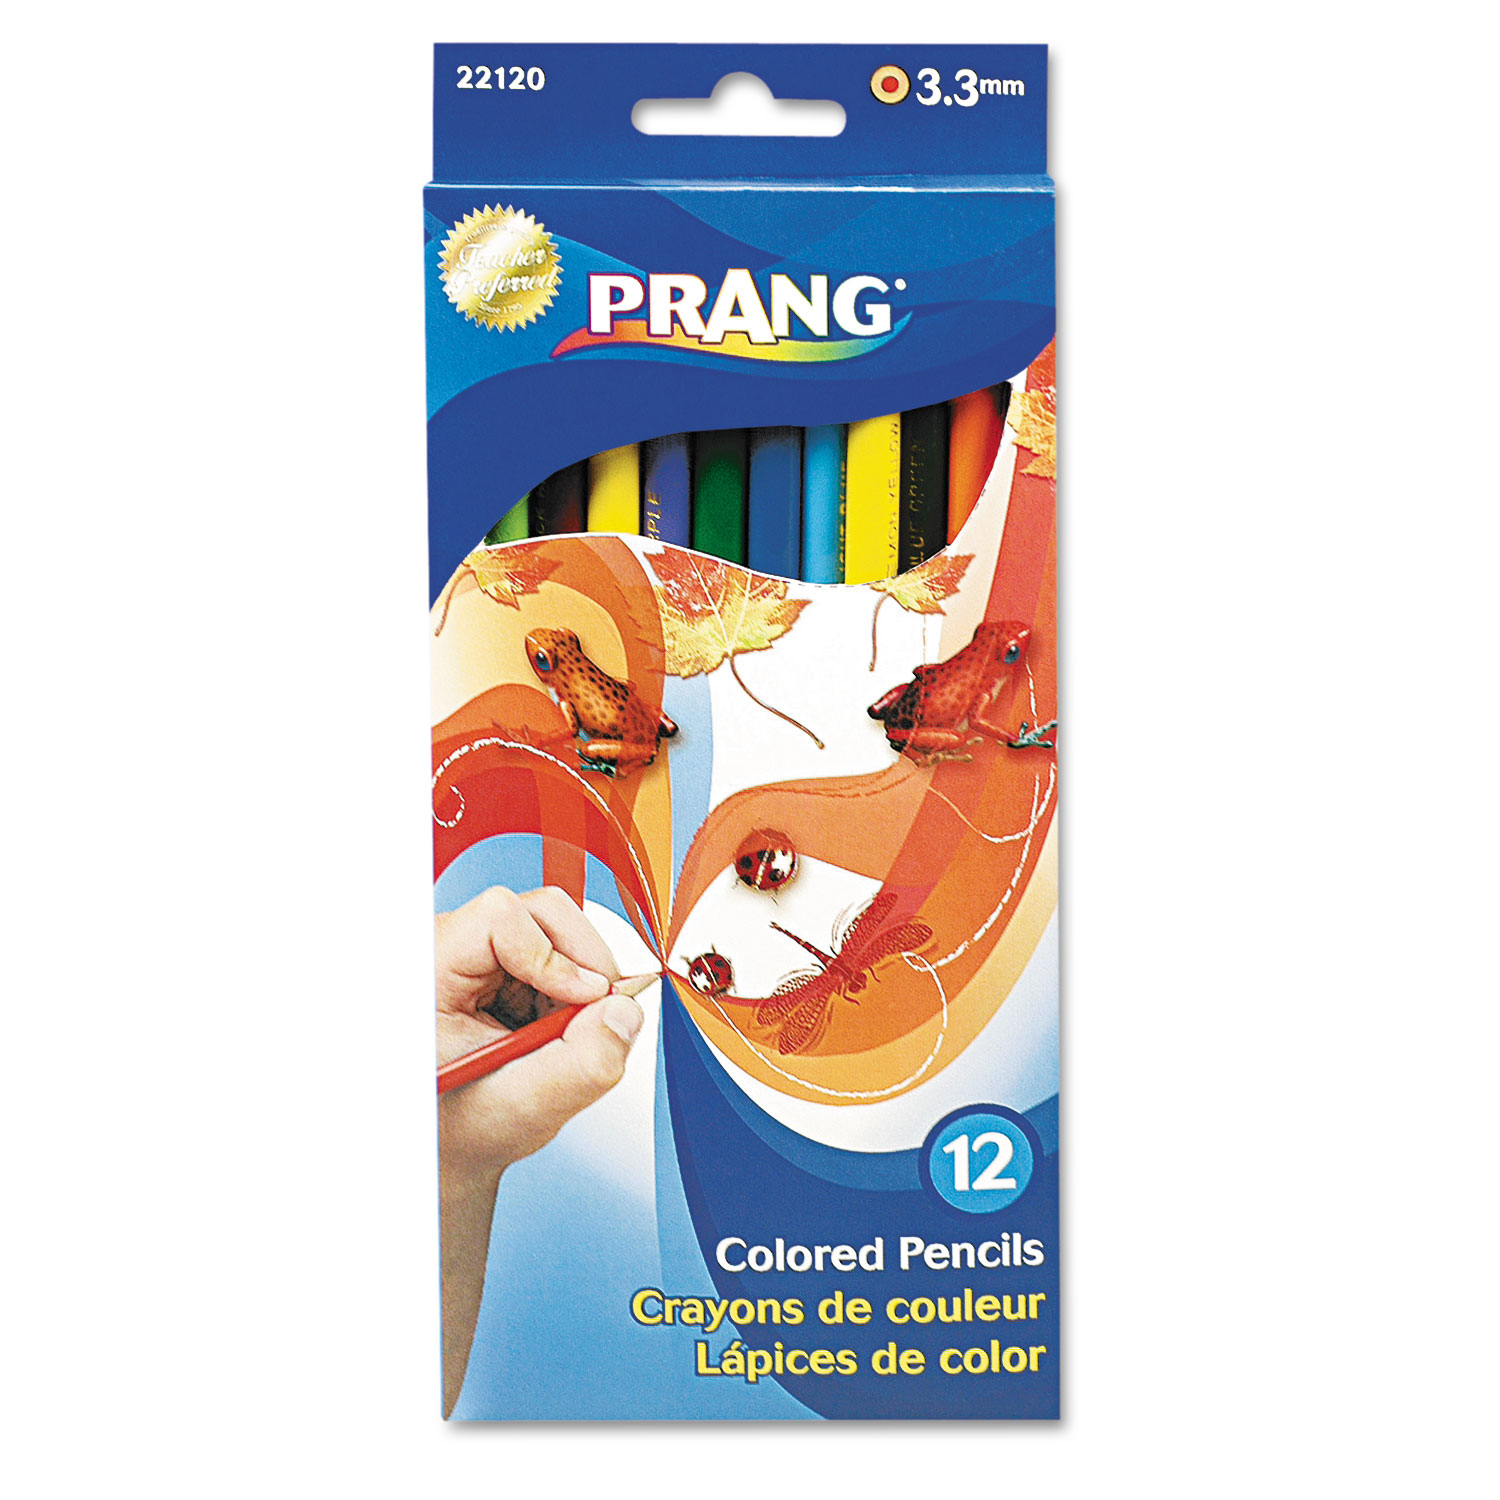 Littleduckling 50 Oil Colored Pencils with Premium Grade and Pre-Sharpened  Color Coordinating Barrels for Kids, Art School Students or Professionals 